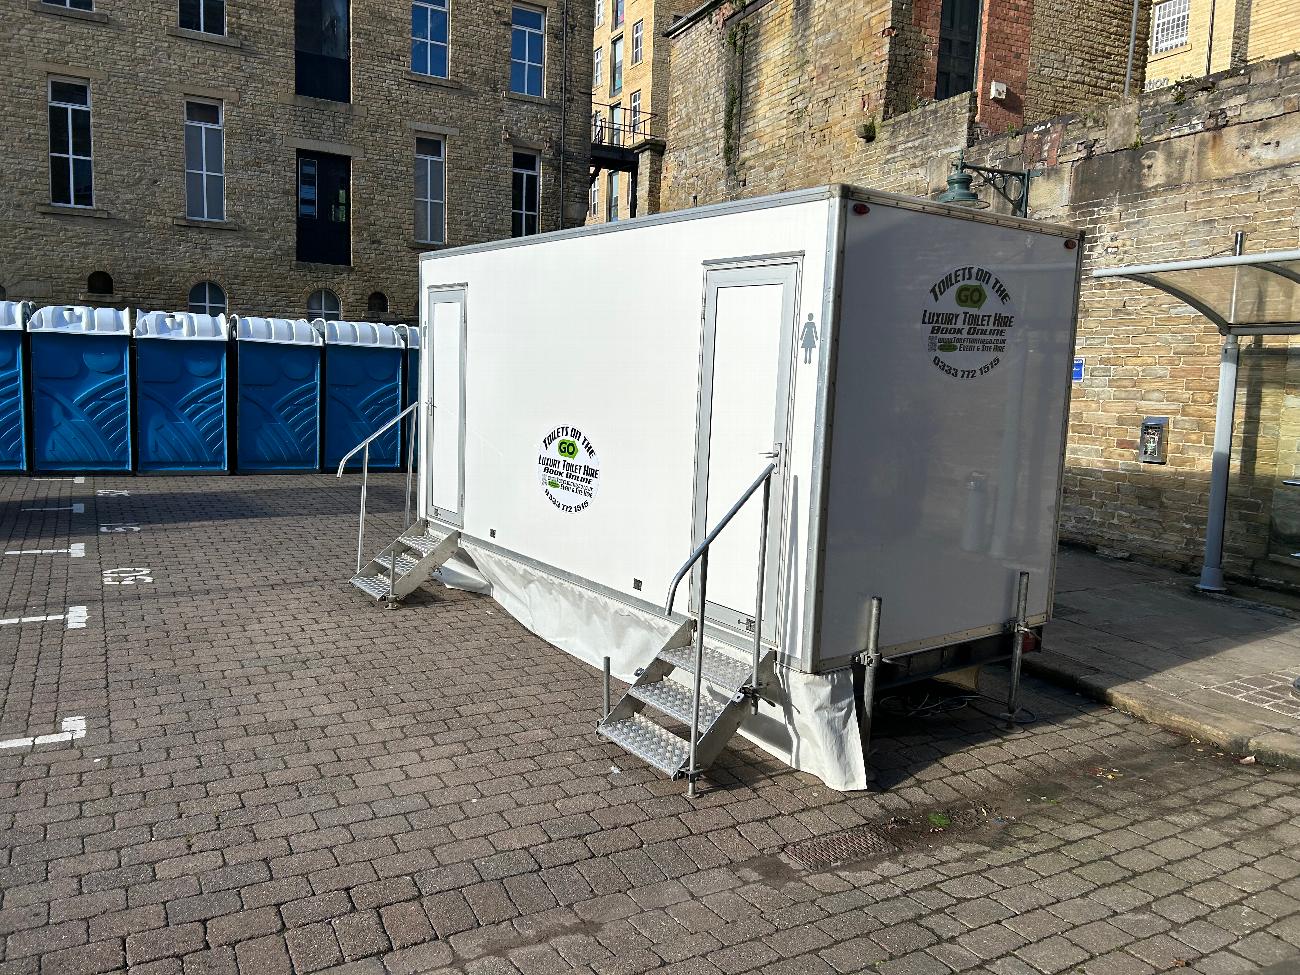 Gallery | Portable Toilet Loo Hire Rental Company in North West uk and Manchester gallery image 2